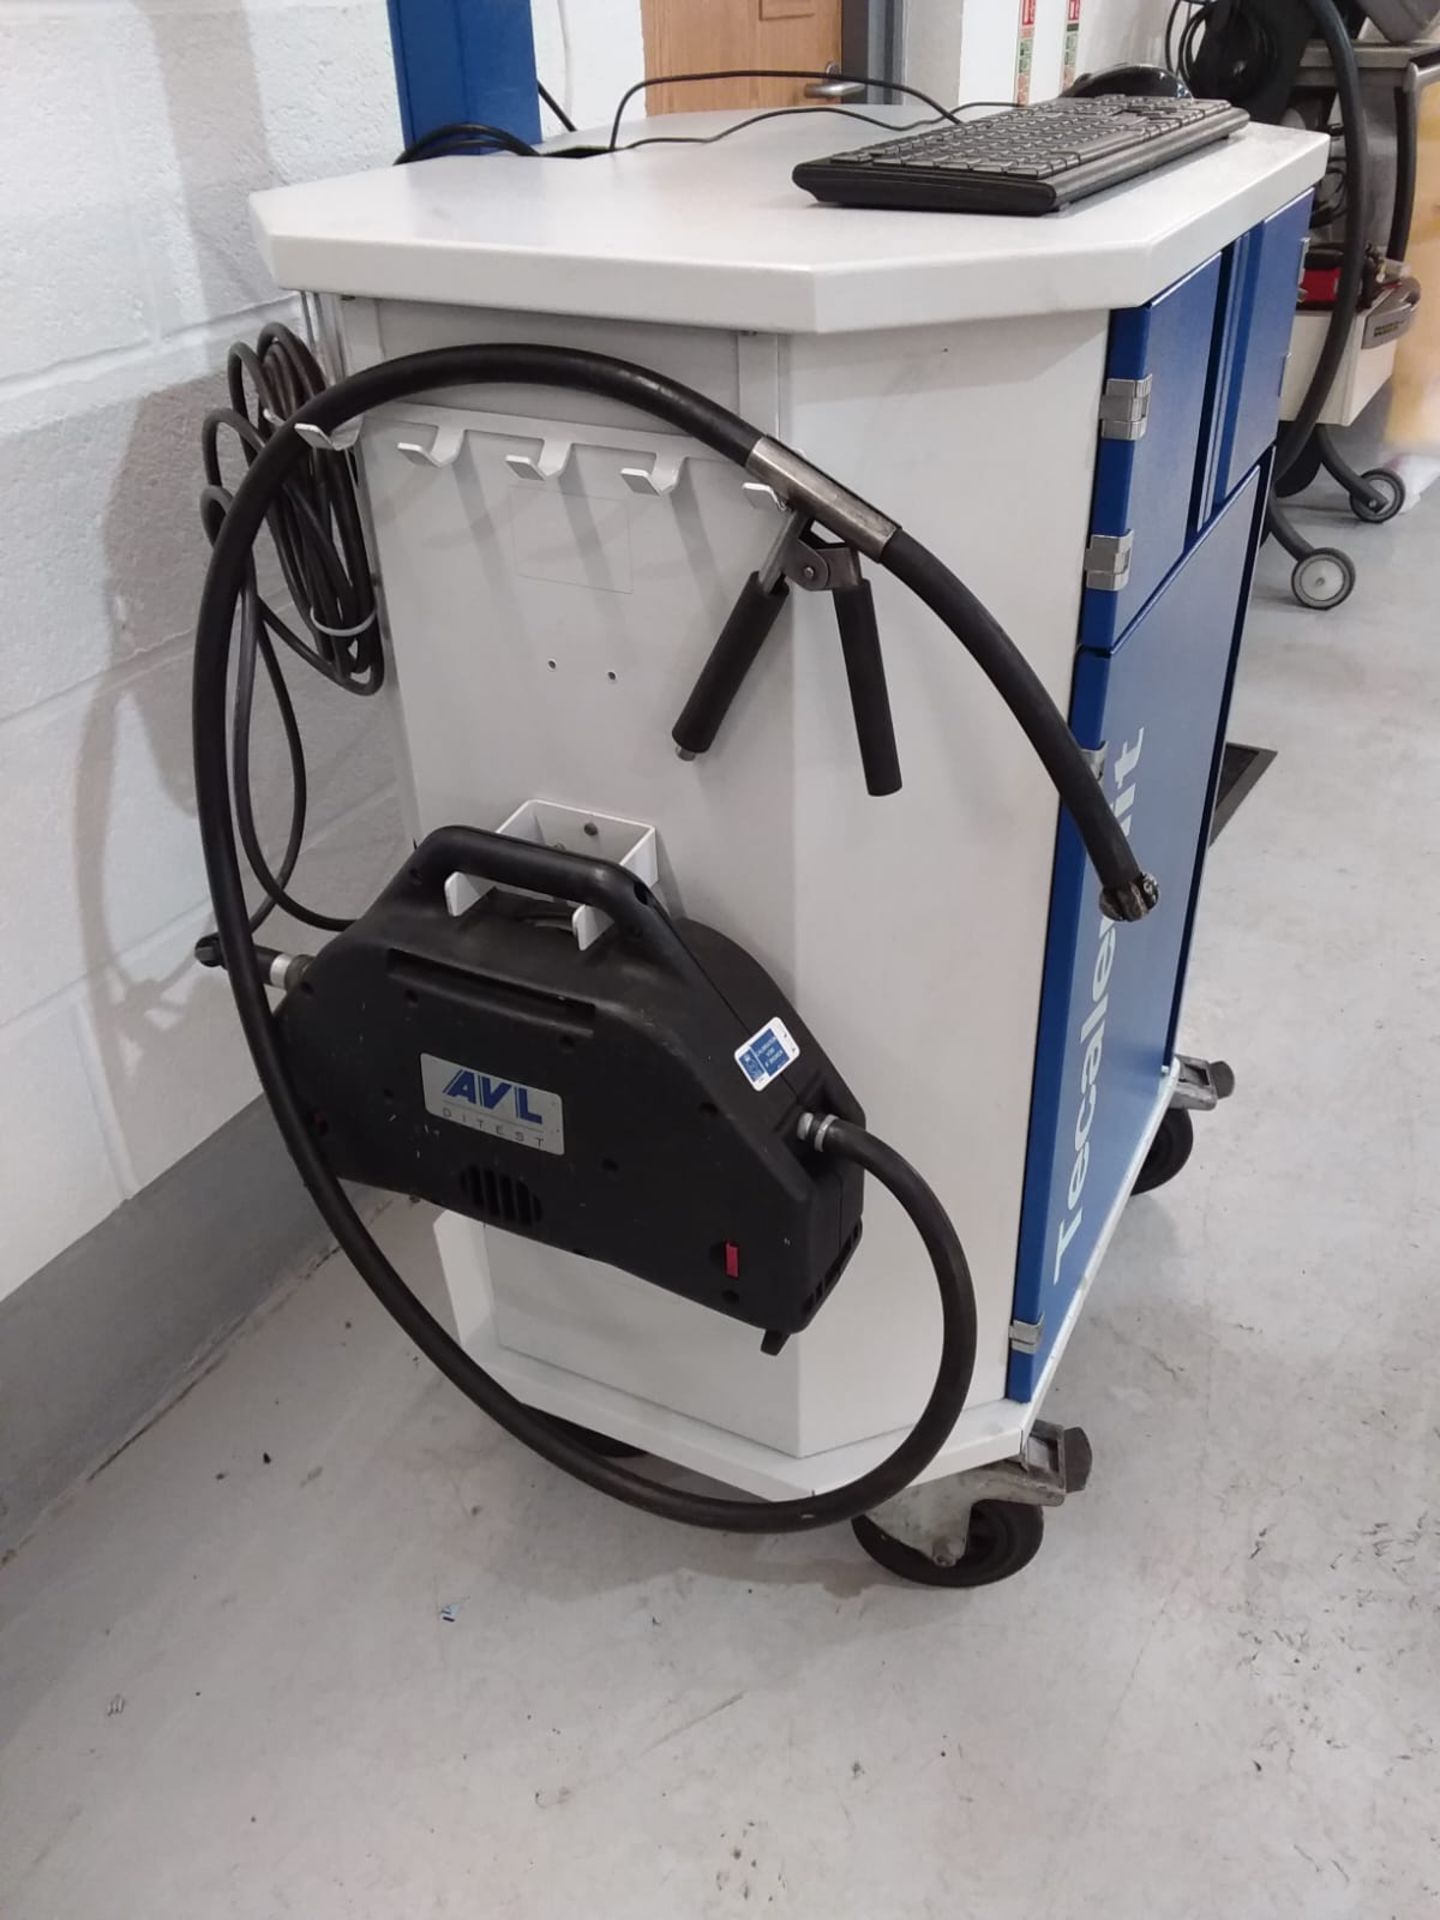 Tecalemit Rolling Road Brake Tester and AVL d-Link gas emission analyser with display read out - Image 5 of 10